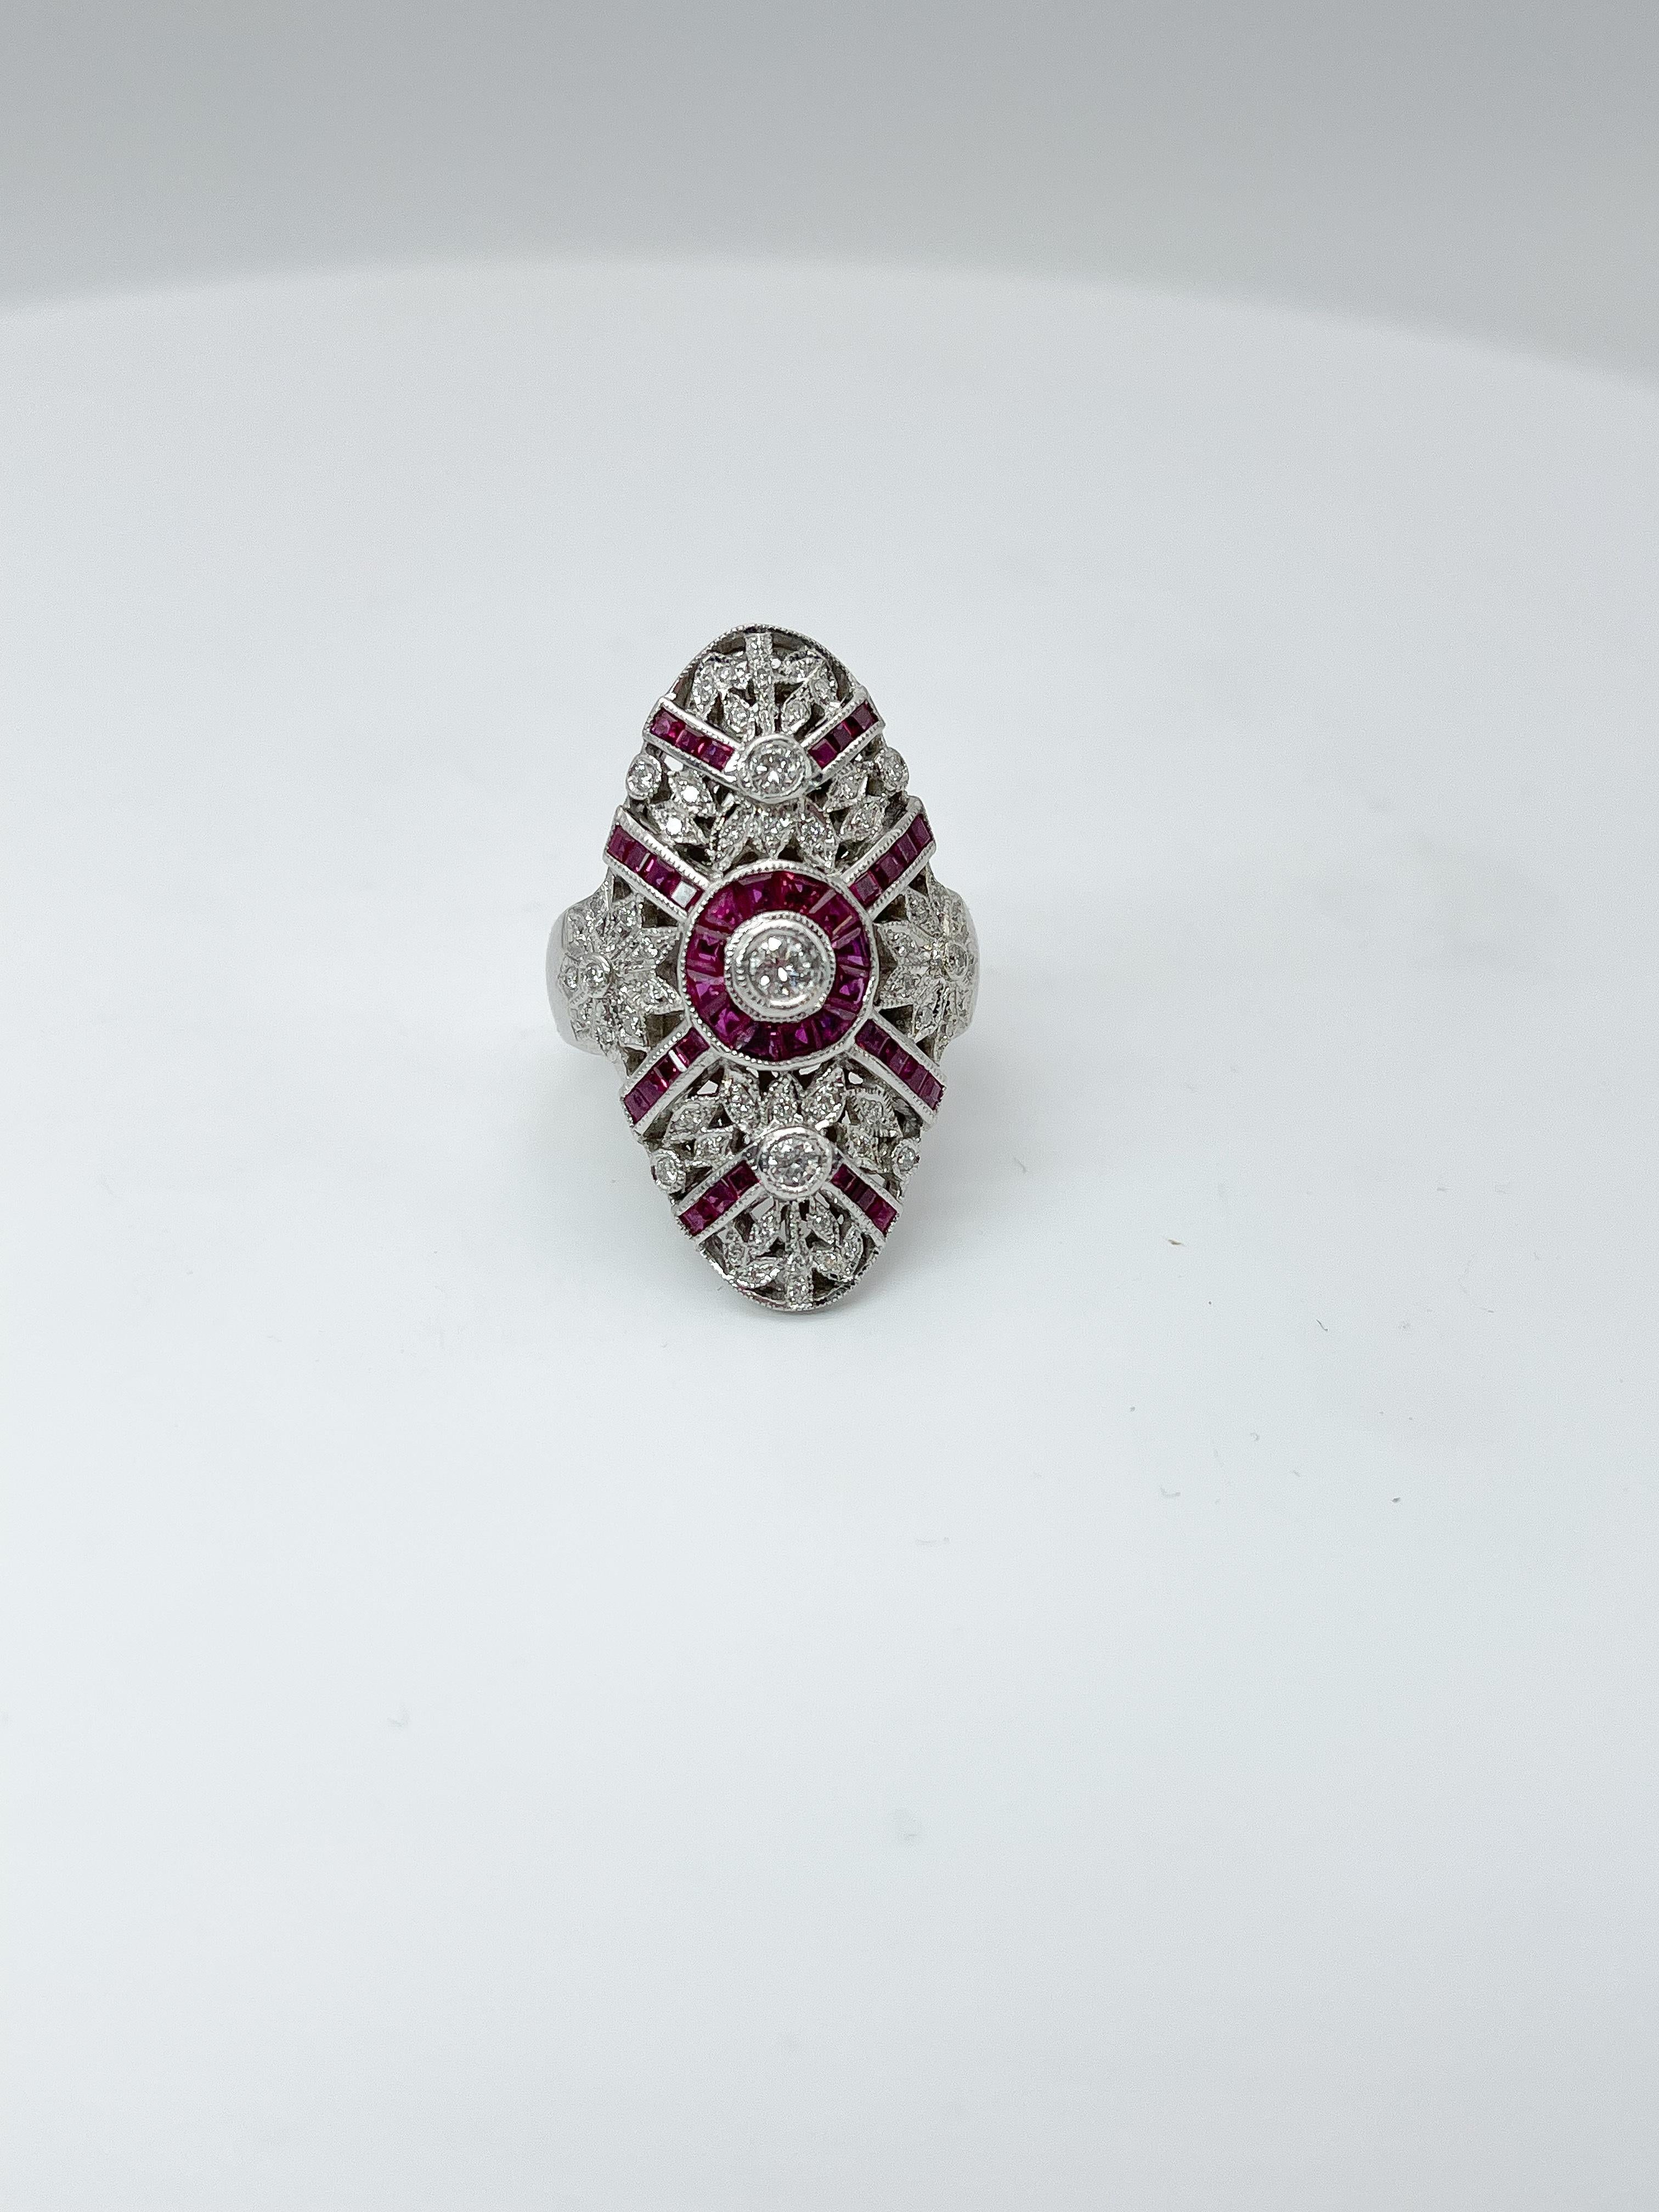 This vintage 18k white gold cocktail fashion ring has a beautiful filigree design with 34 princess cut rubies, 6 trillion rubies, and 57 round diamonds. Ring measures a size 8 and weighs 13.27 grams. 